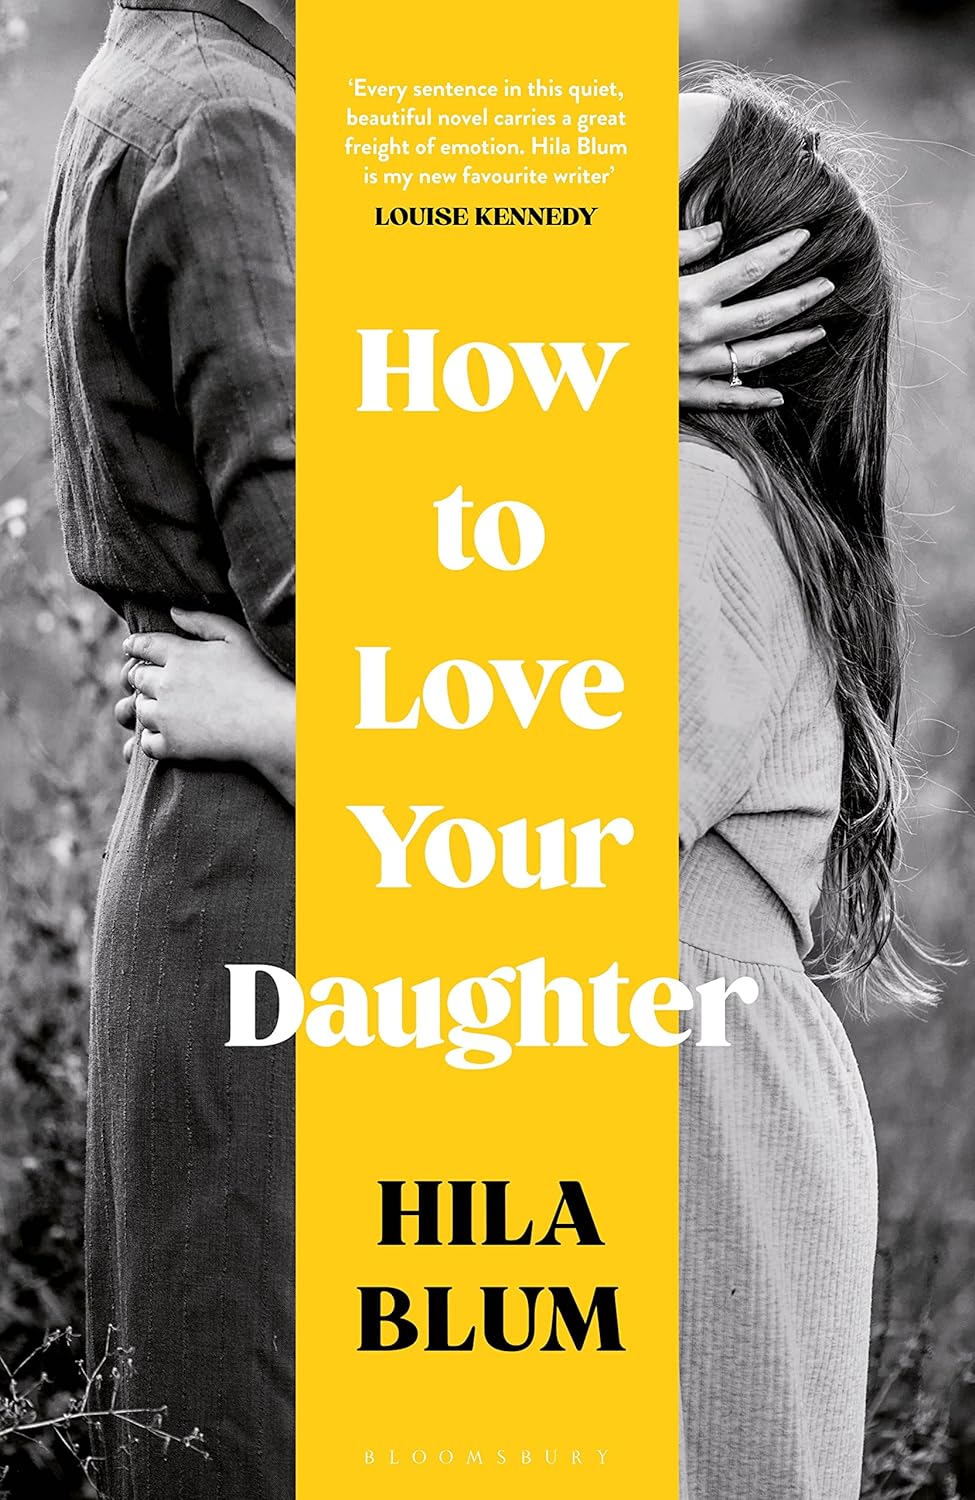 How to Love Your Daughter by Hila Blum (HC)